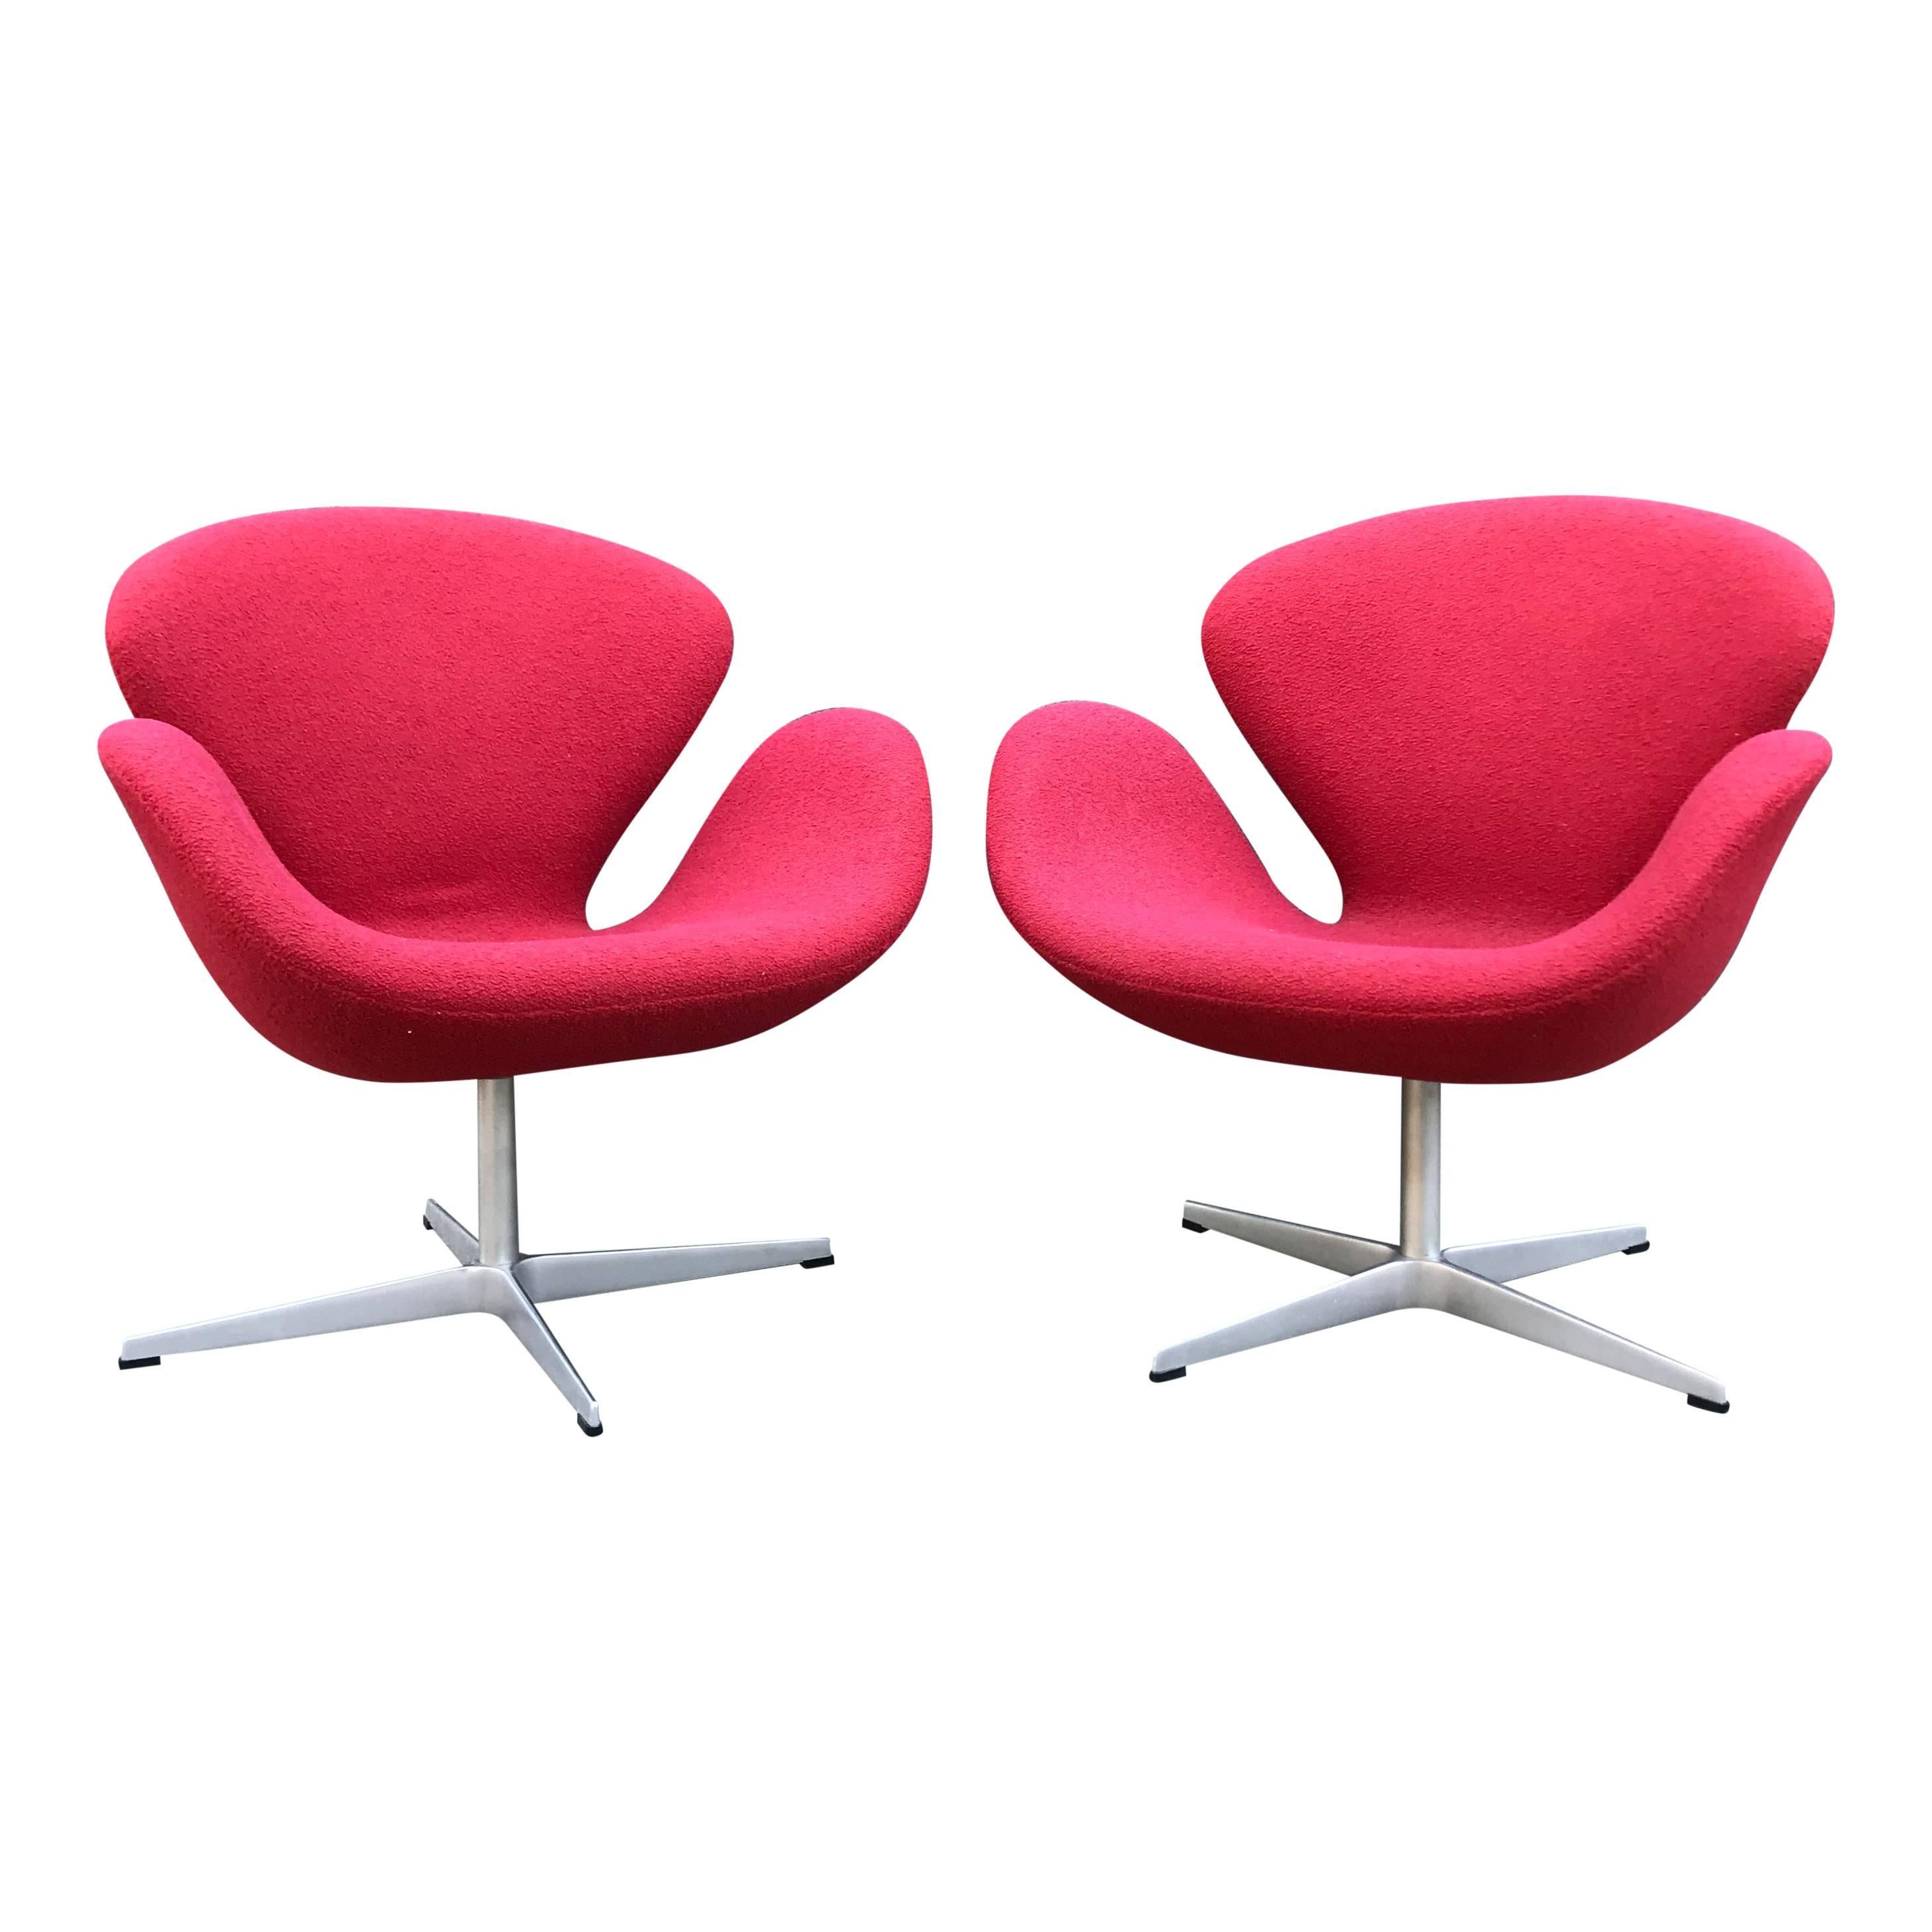 For your consideration are a pair of authentic Arne Jacobsen for Fritz Hansen swan chairs.

These chairs are aptly named due to their fluid and graceful design. 

Originally designed for the SAS Royal Hotel in Copenhagen, the chairs are now